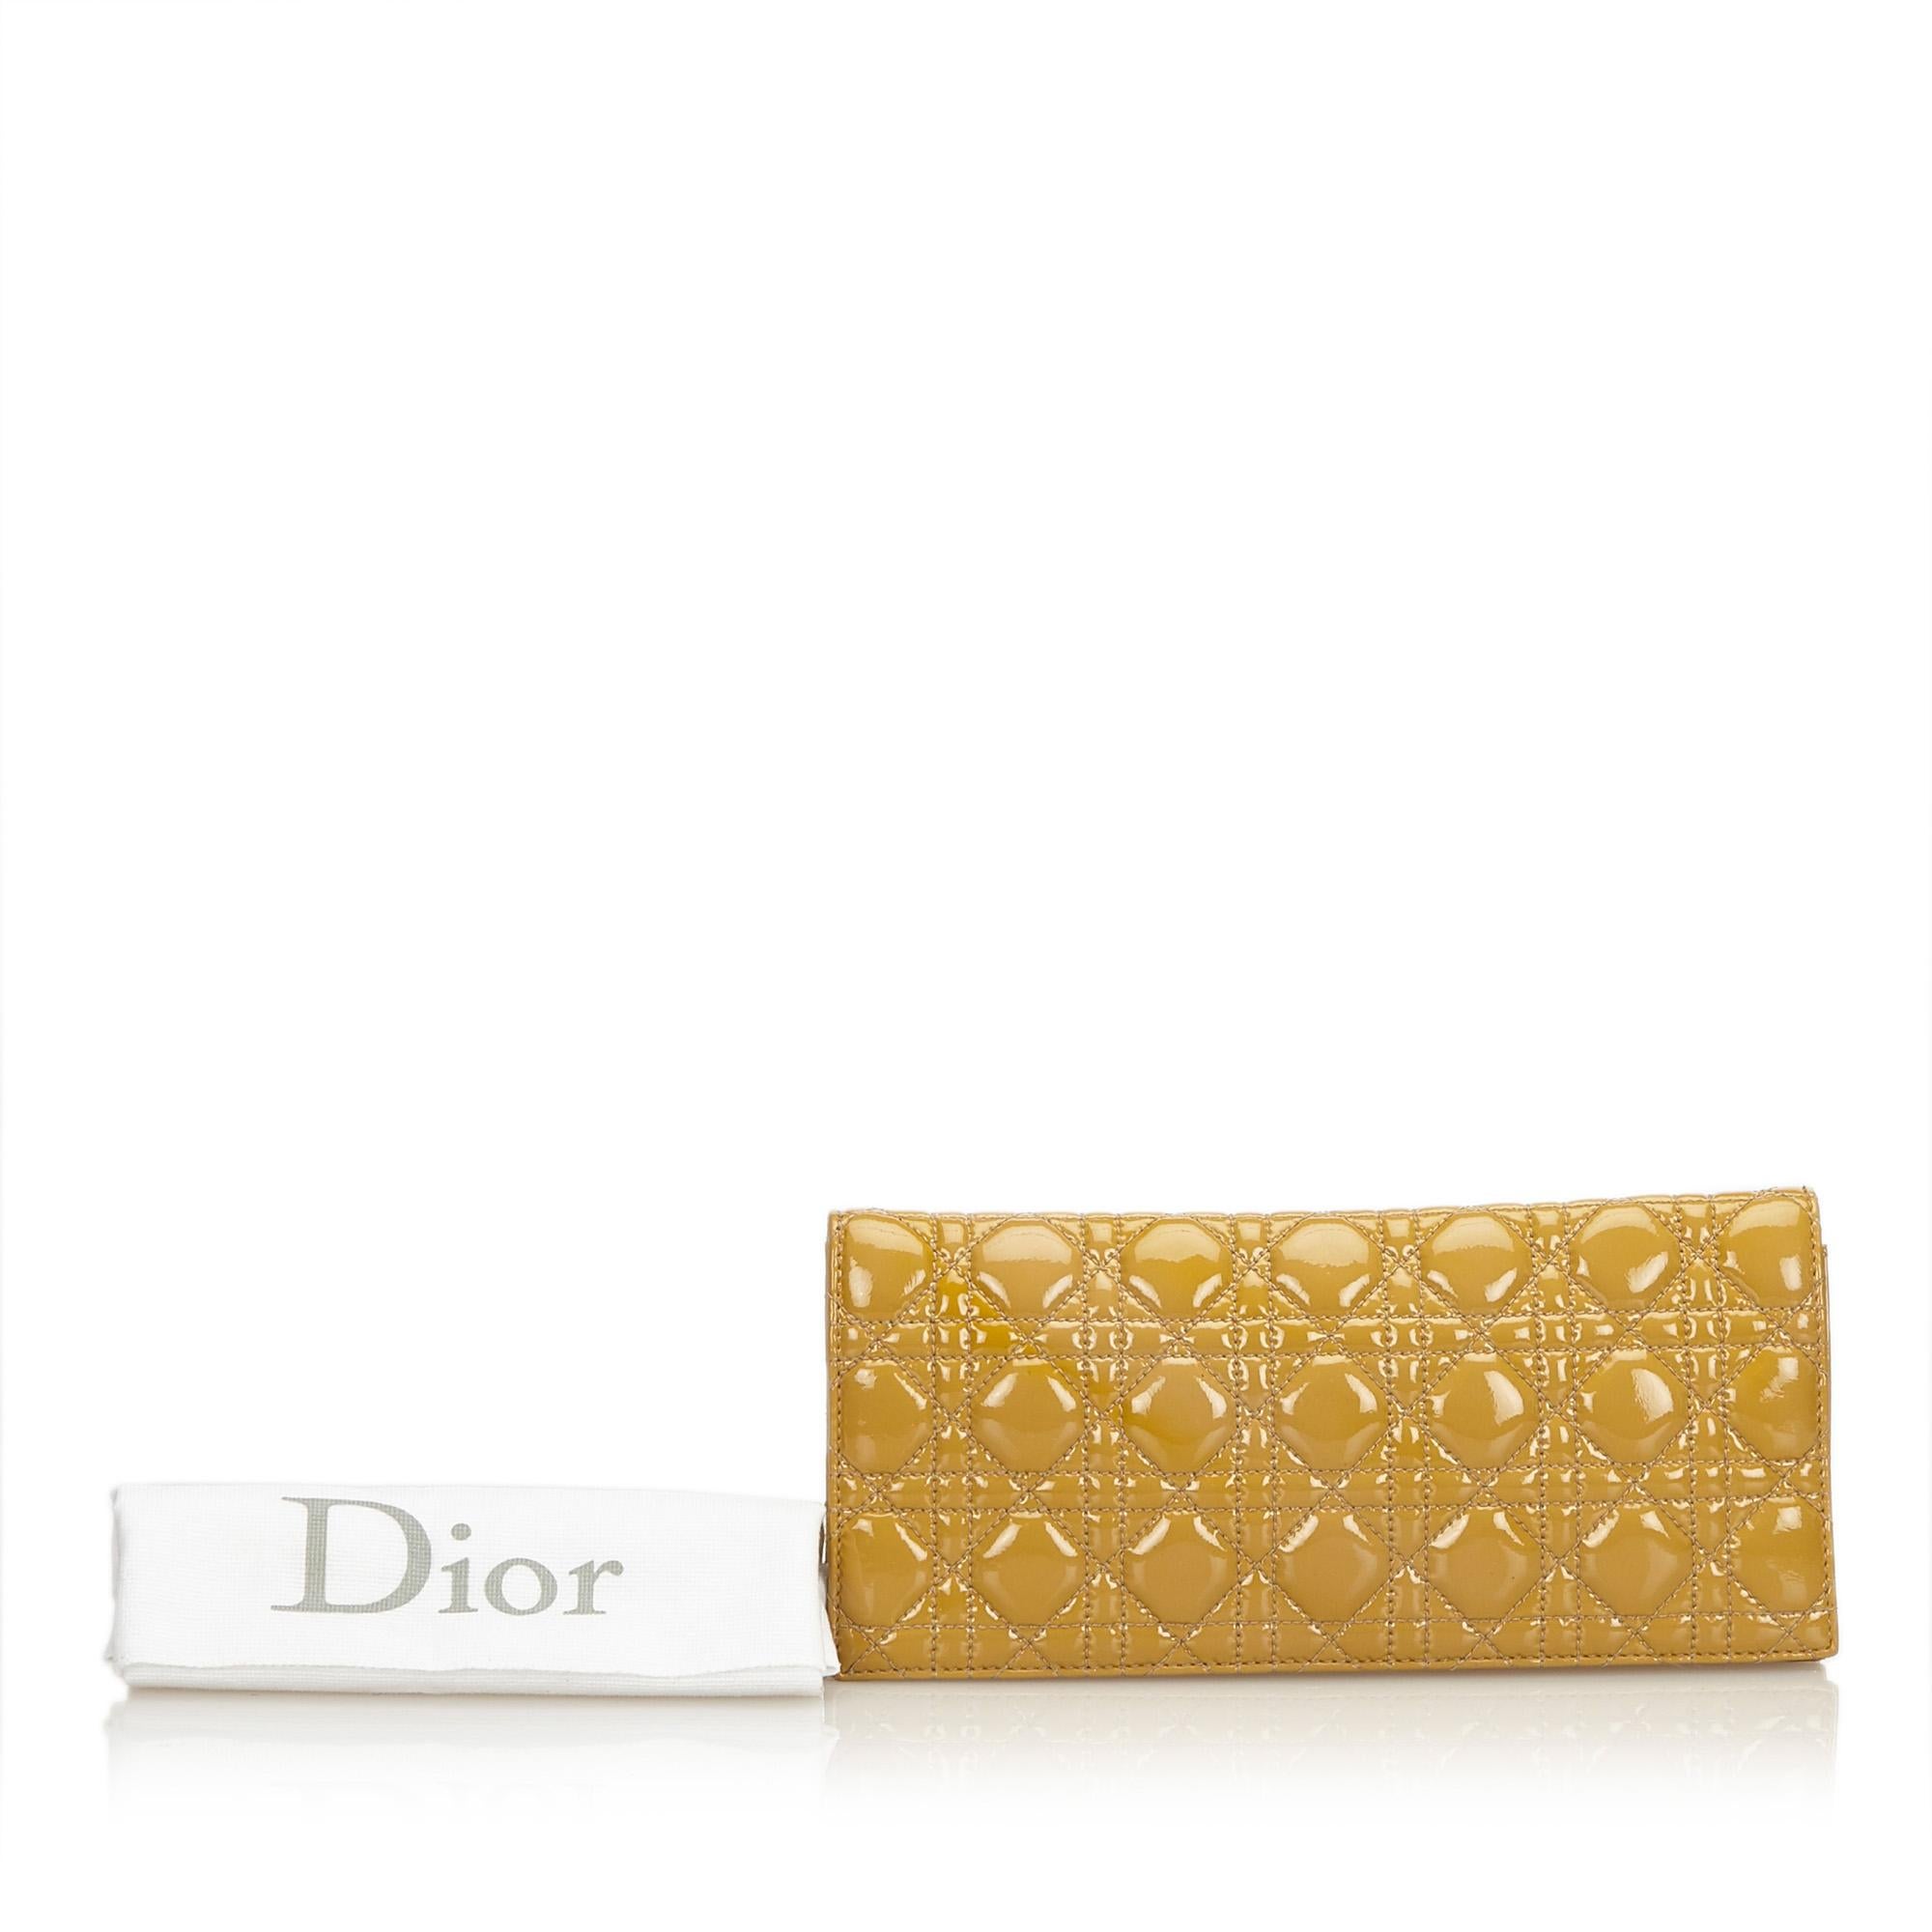 Dior Yellow Cannage Patent Leather Chain Clutch Bag 4